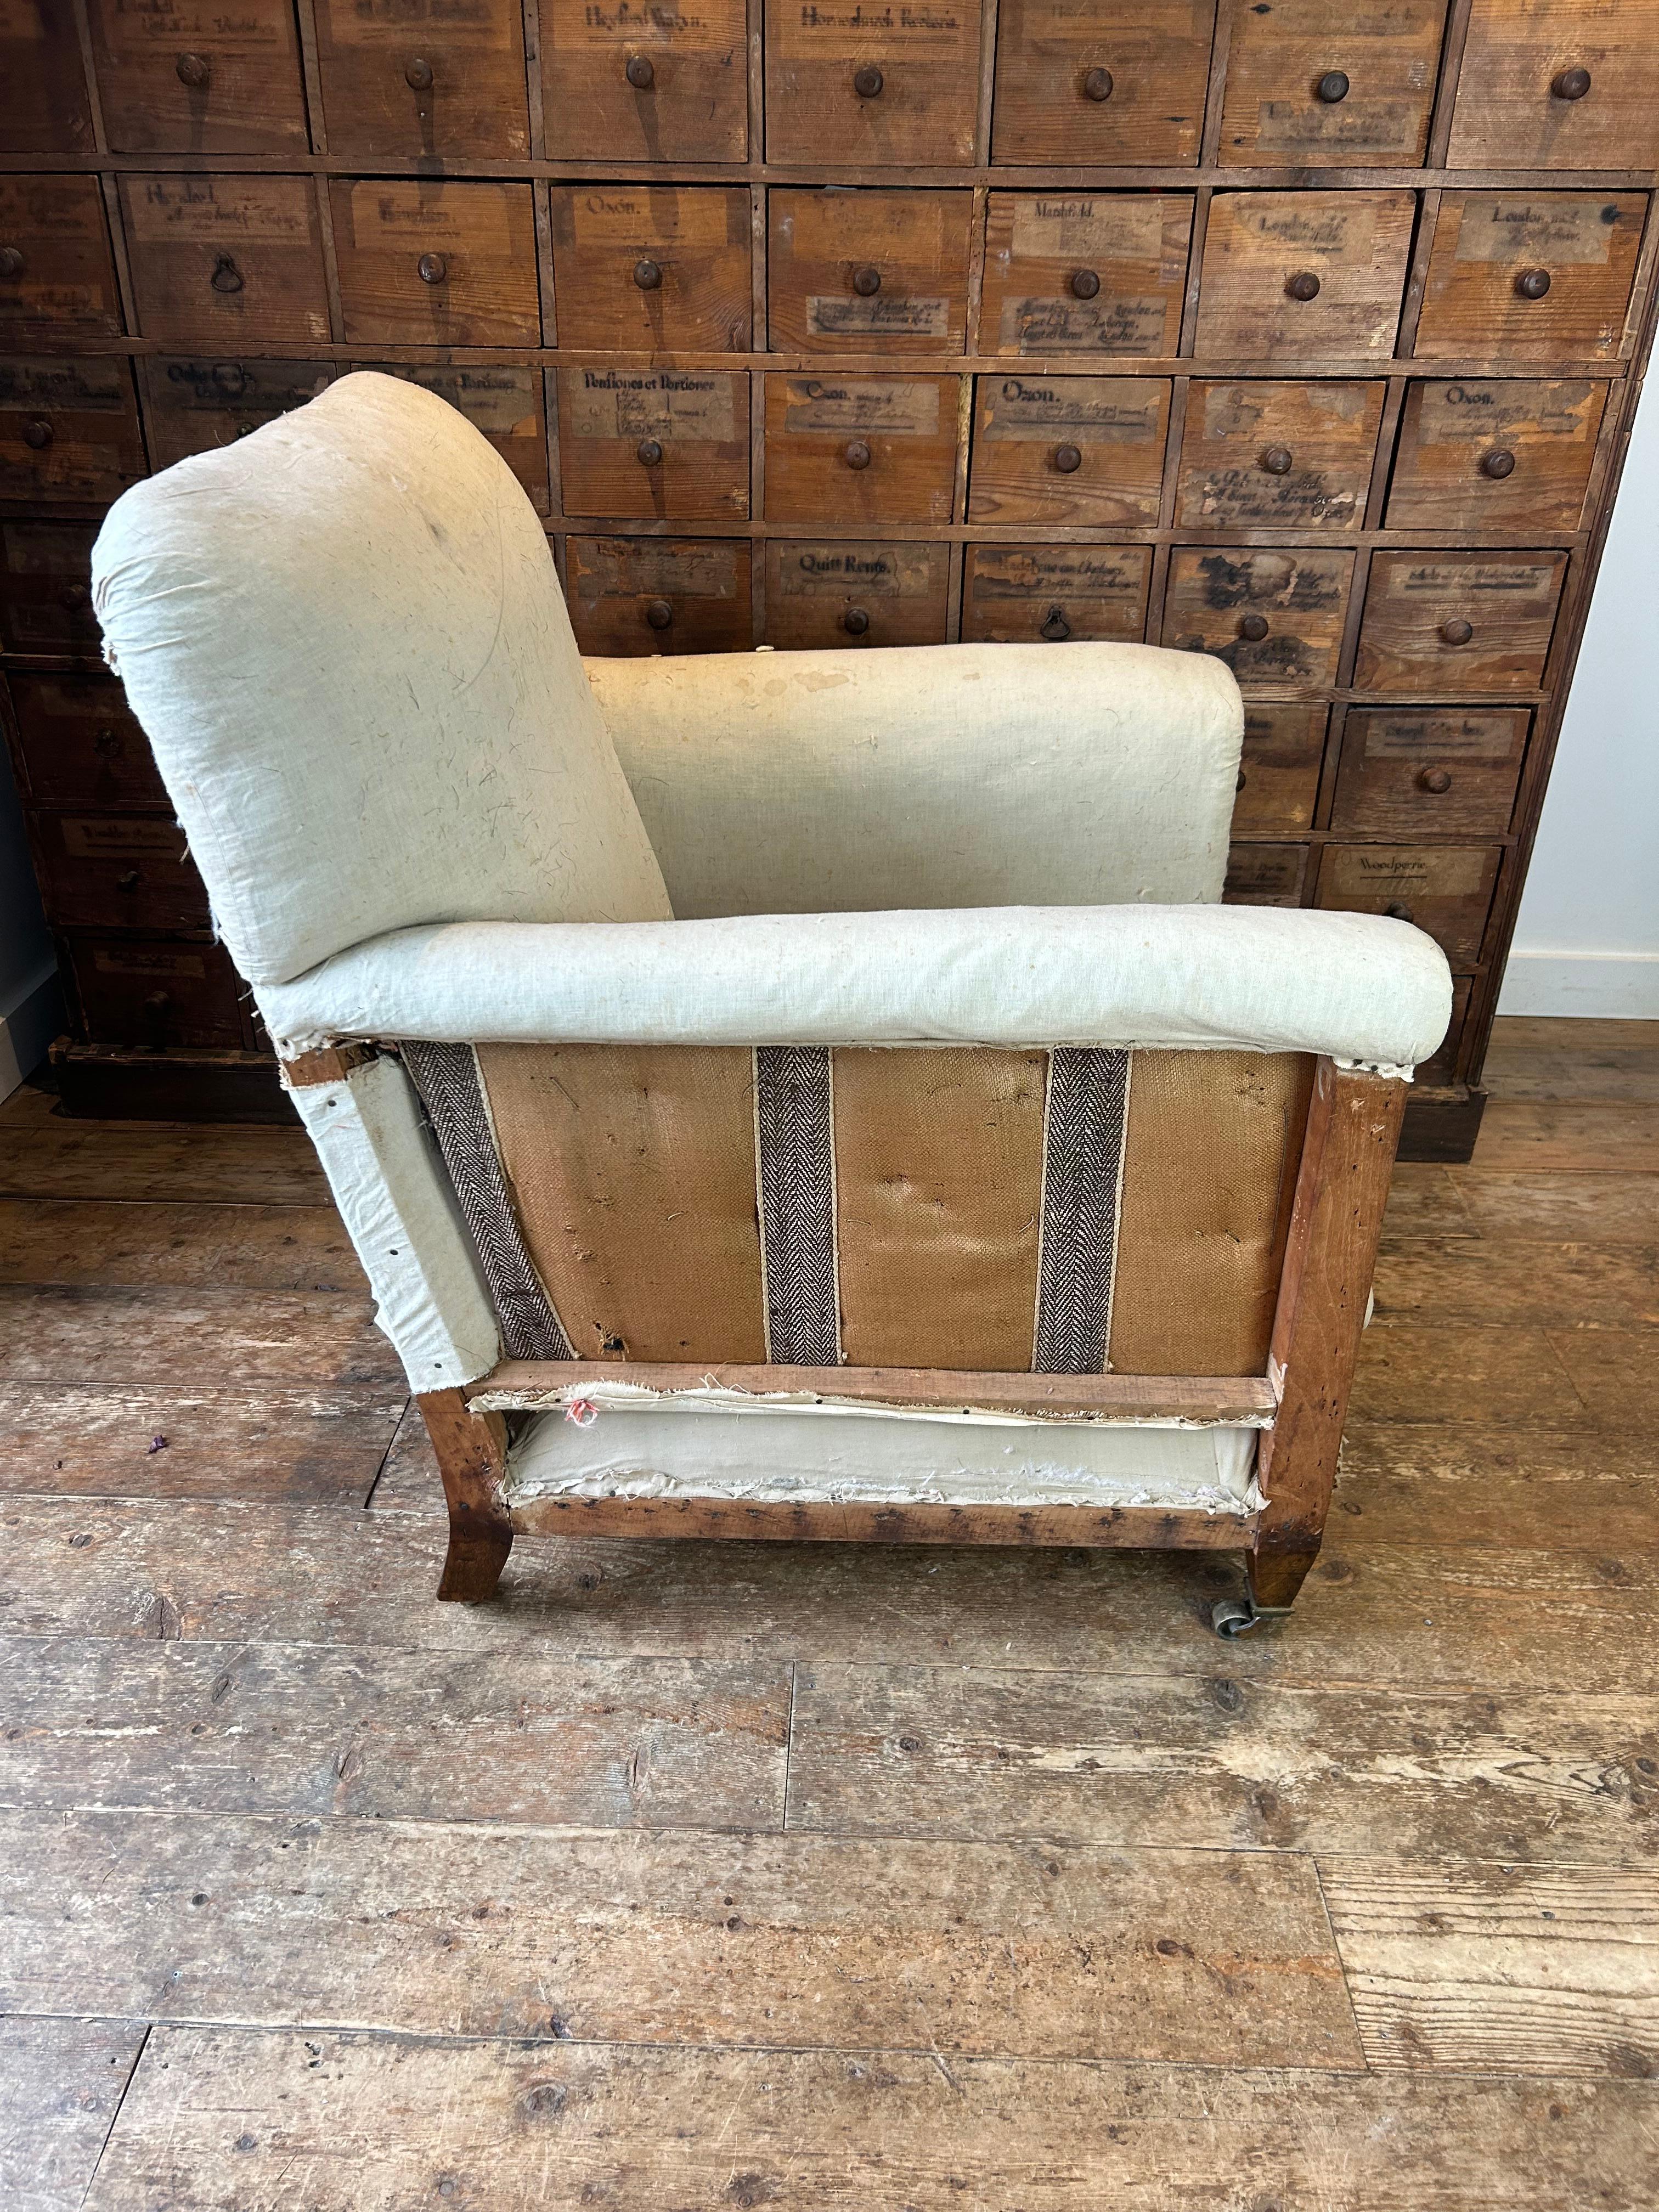 Country William Birch Stamped Upholstered English Armchair, circa 1890 For Sale